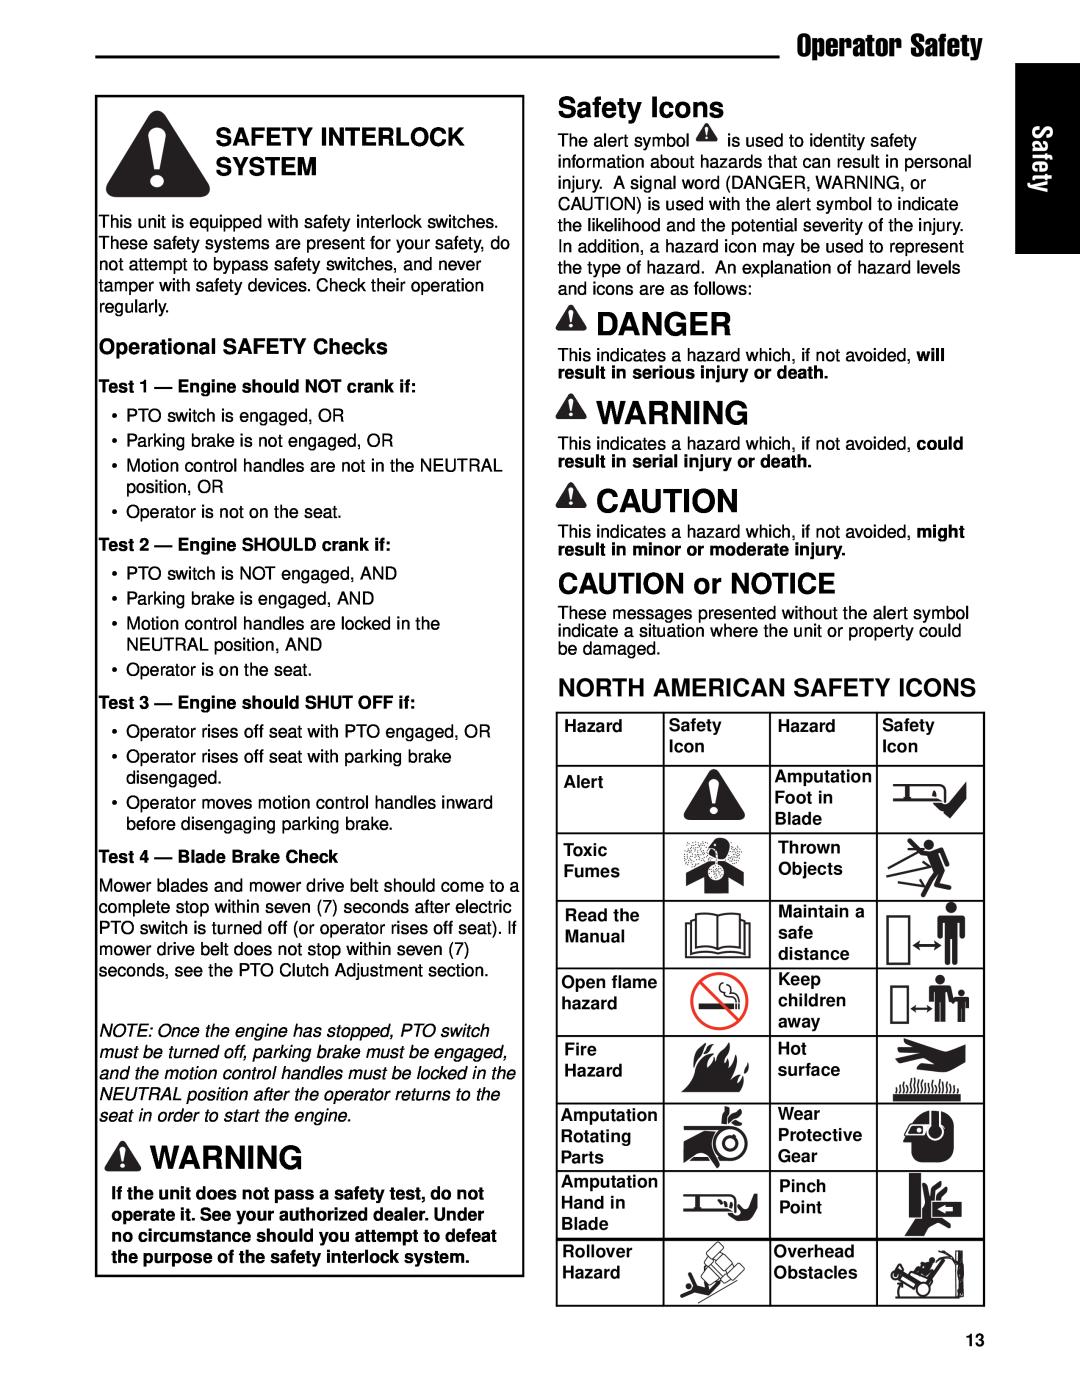 Briggs & Stratton 5900717, 5901186 Danger, CAUTION or NOTICE, Safety Interlock System, North American Safety Icons 